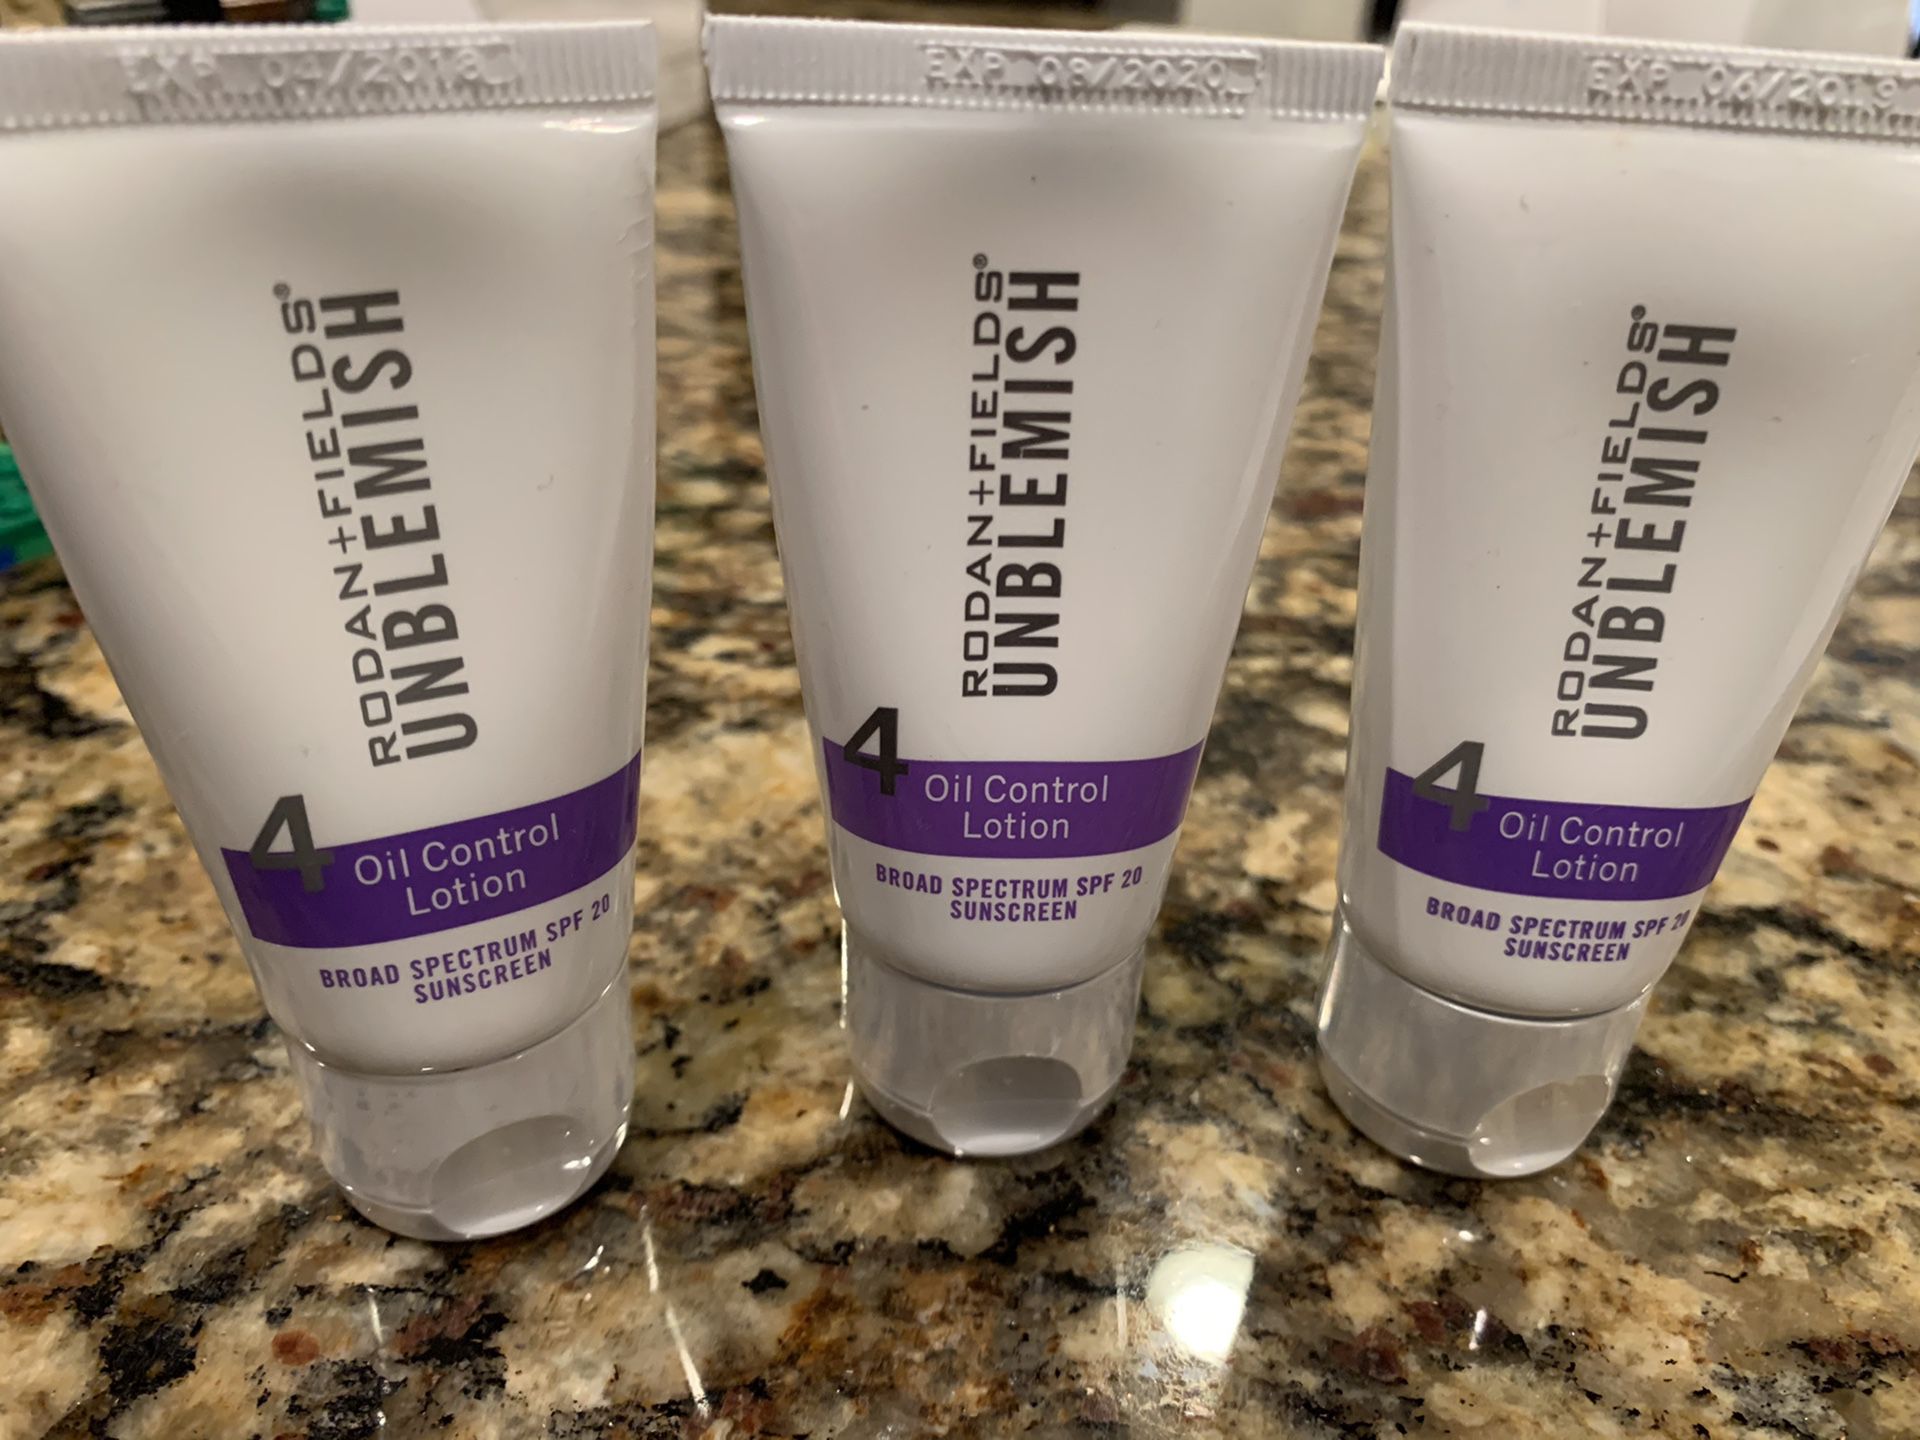 Rodan and fields oil control lotion